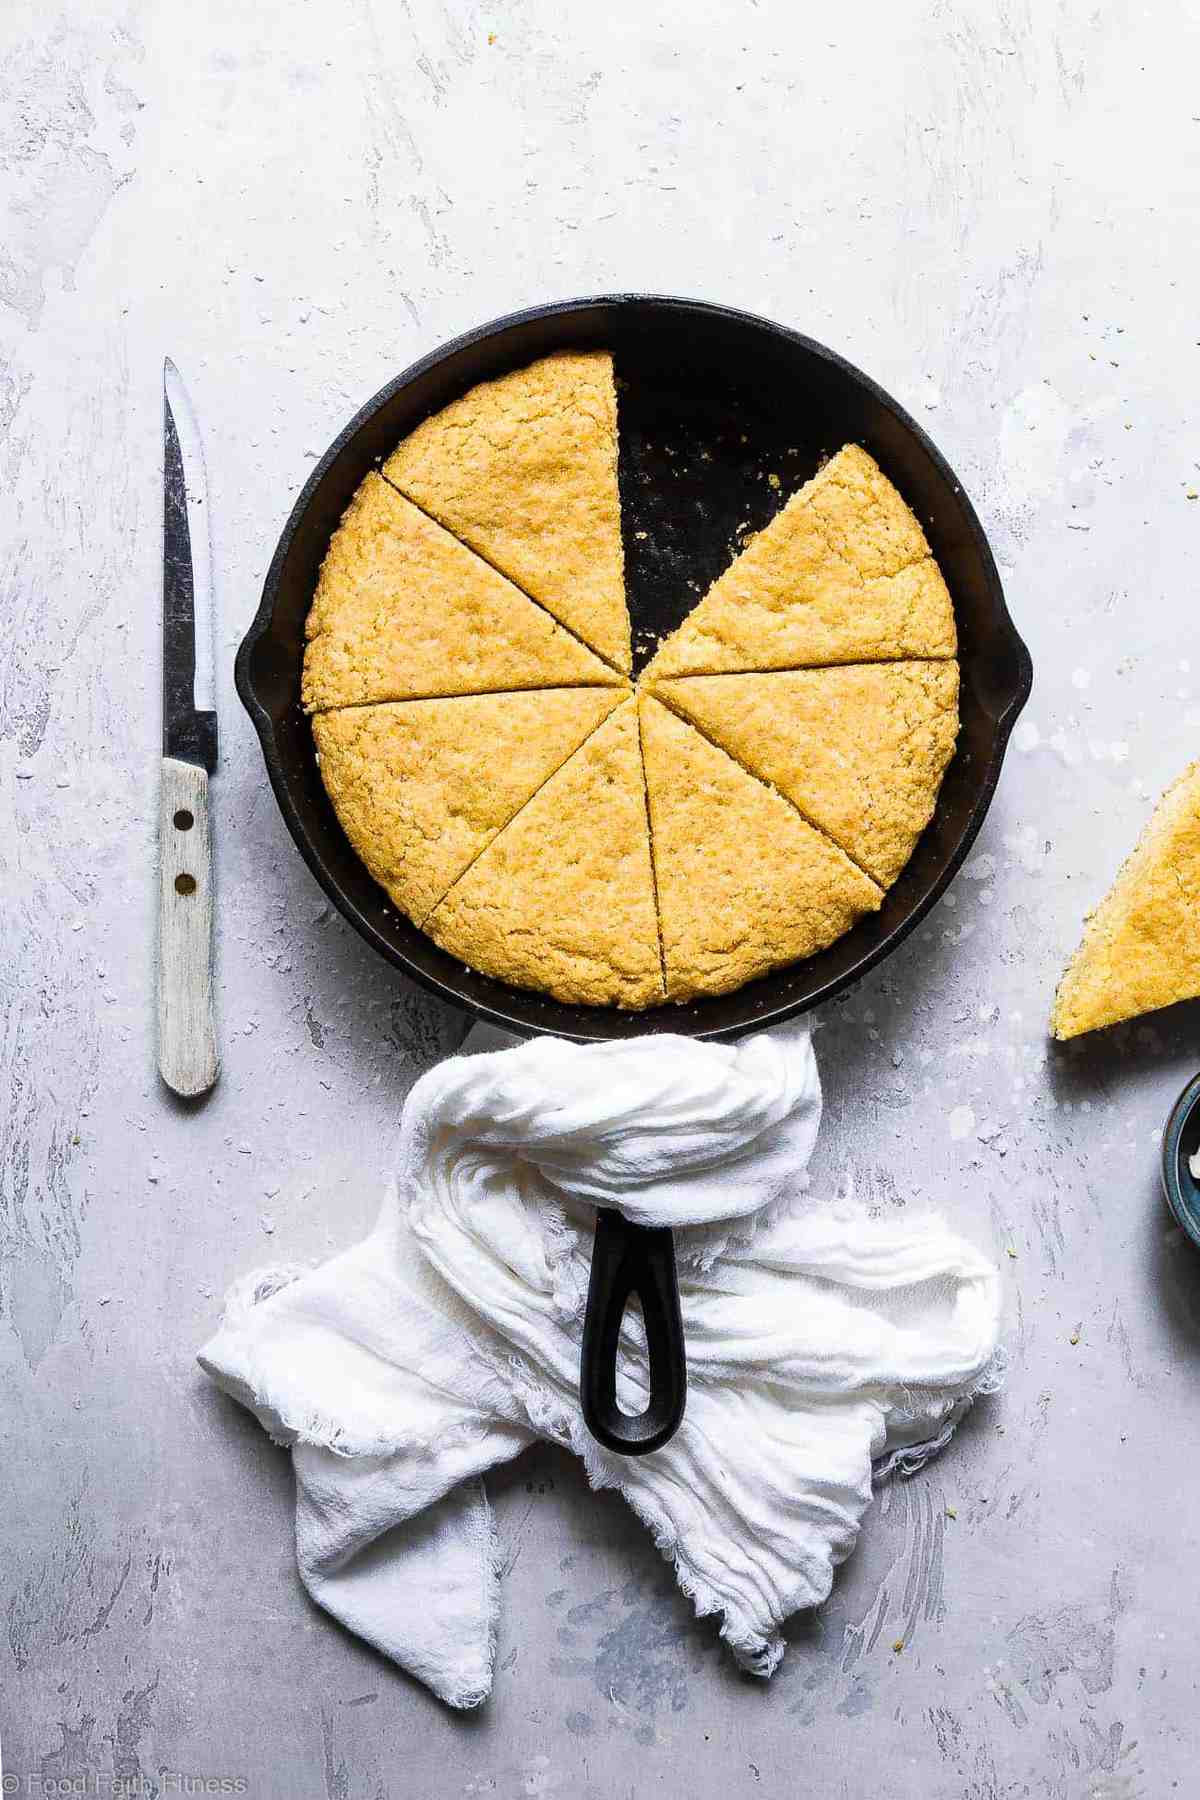 The Best Vegan Cornbread Recipe - This is the BEST gluten free, dairy free, egg free and vegan cornbread recipe! It's perfectly sweet, dense and SO chewy, you will never believe it's healthy and SO easy to make! | #Foodfaithfitness | #Glutenfree #Vegan #Dairyfree #Eggfree #Cornbread